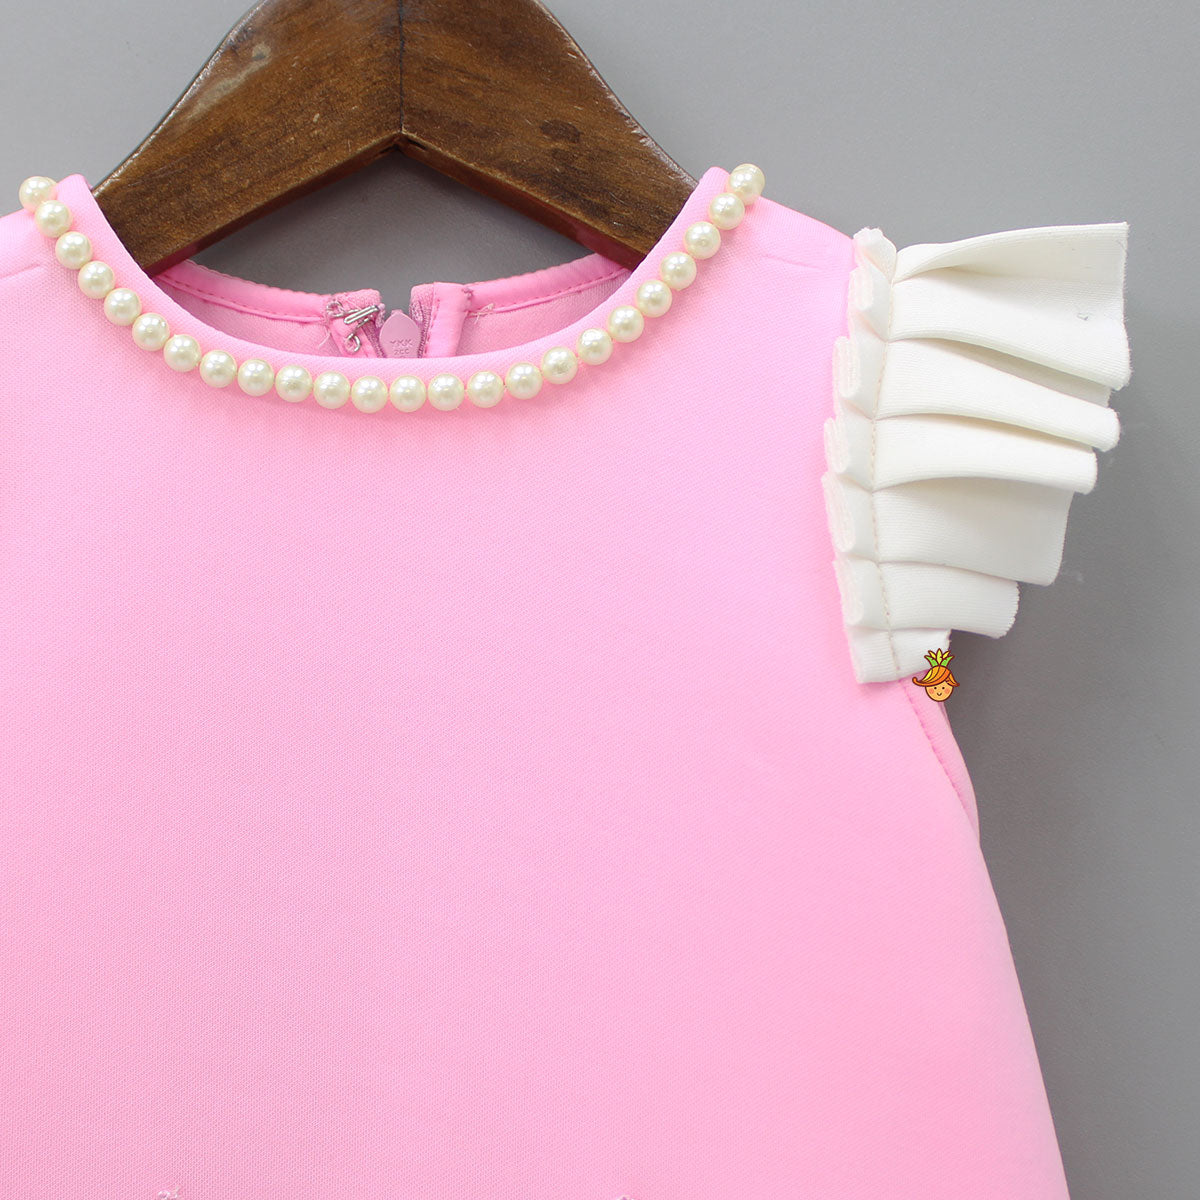 Cute Candy Embroidered Baby Pink Dress With Matching Head Band